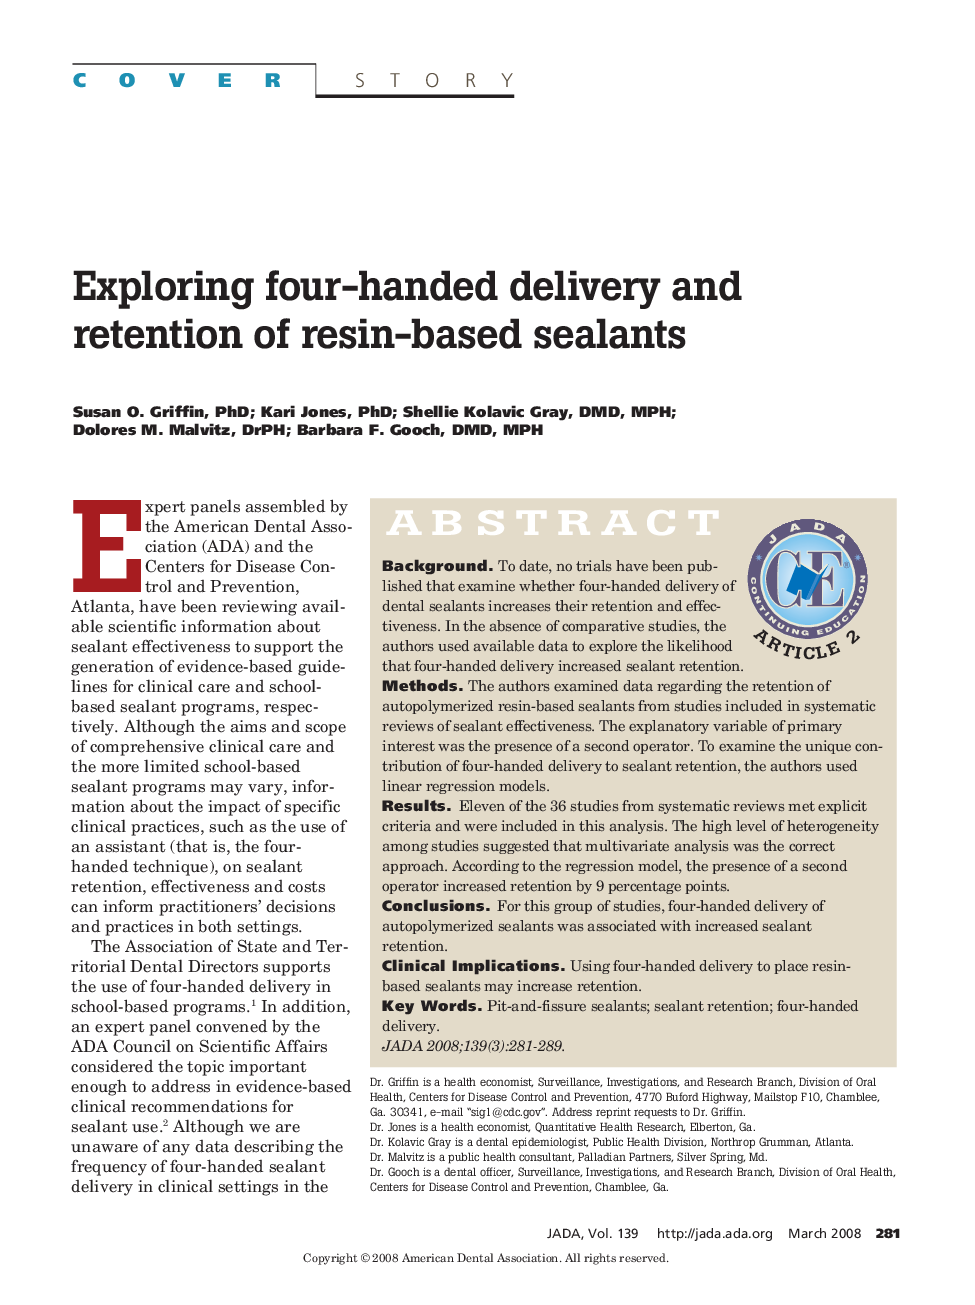 Exploring Four-Handed Delivery and Retention of Resin-Based Sealants 